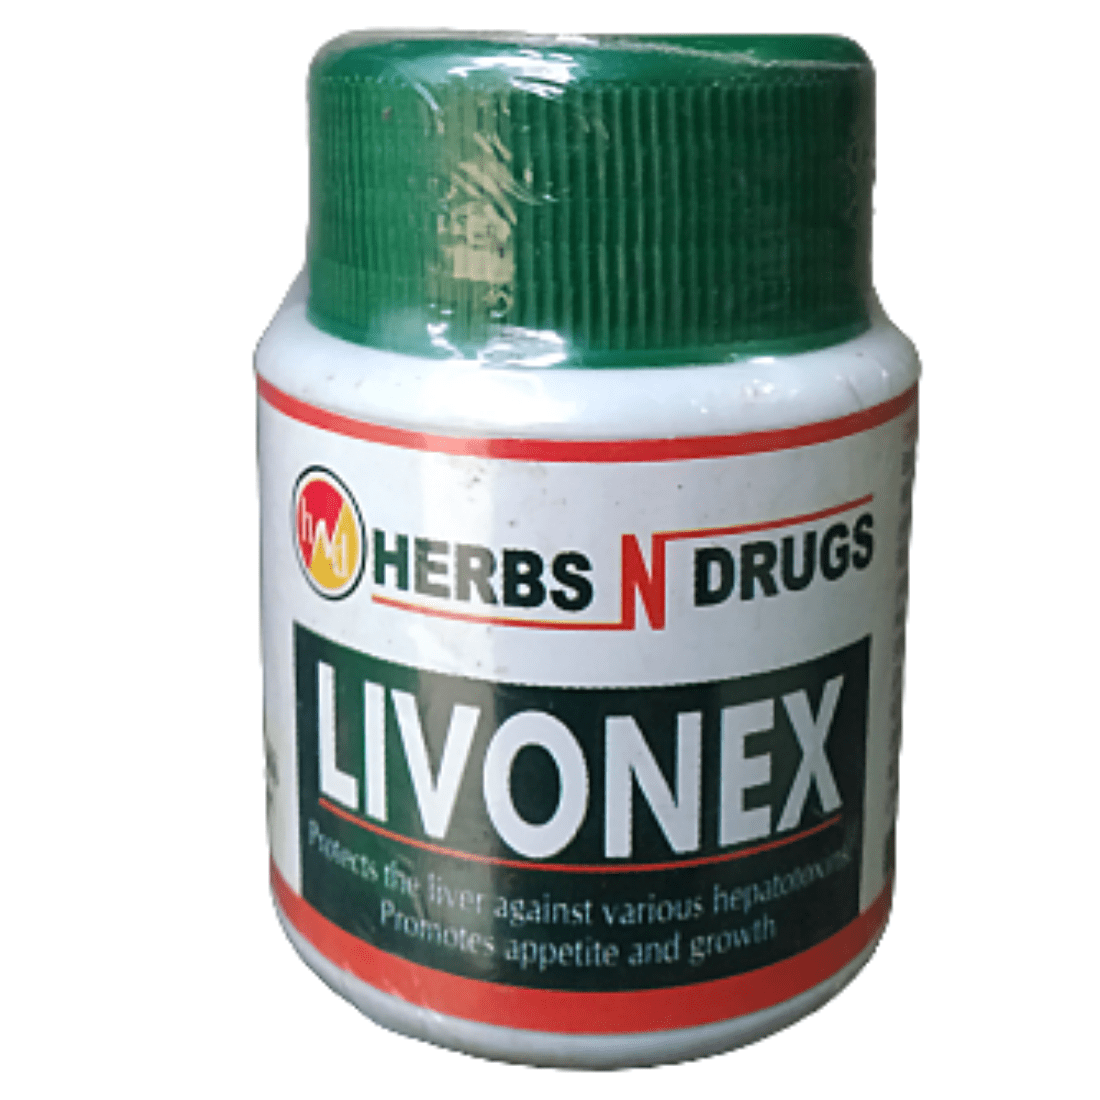 LIVONEX Capsules are formulated to give quick & sure relief from various liver disorders